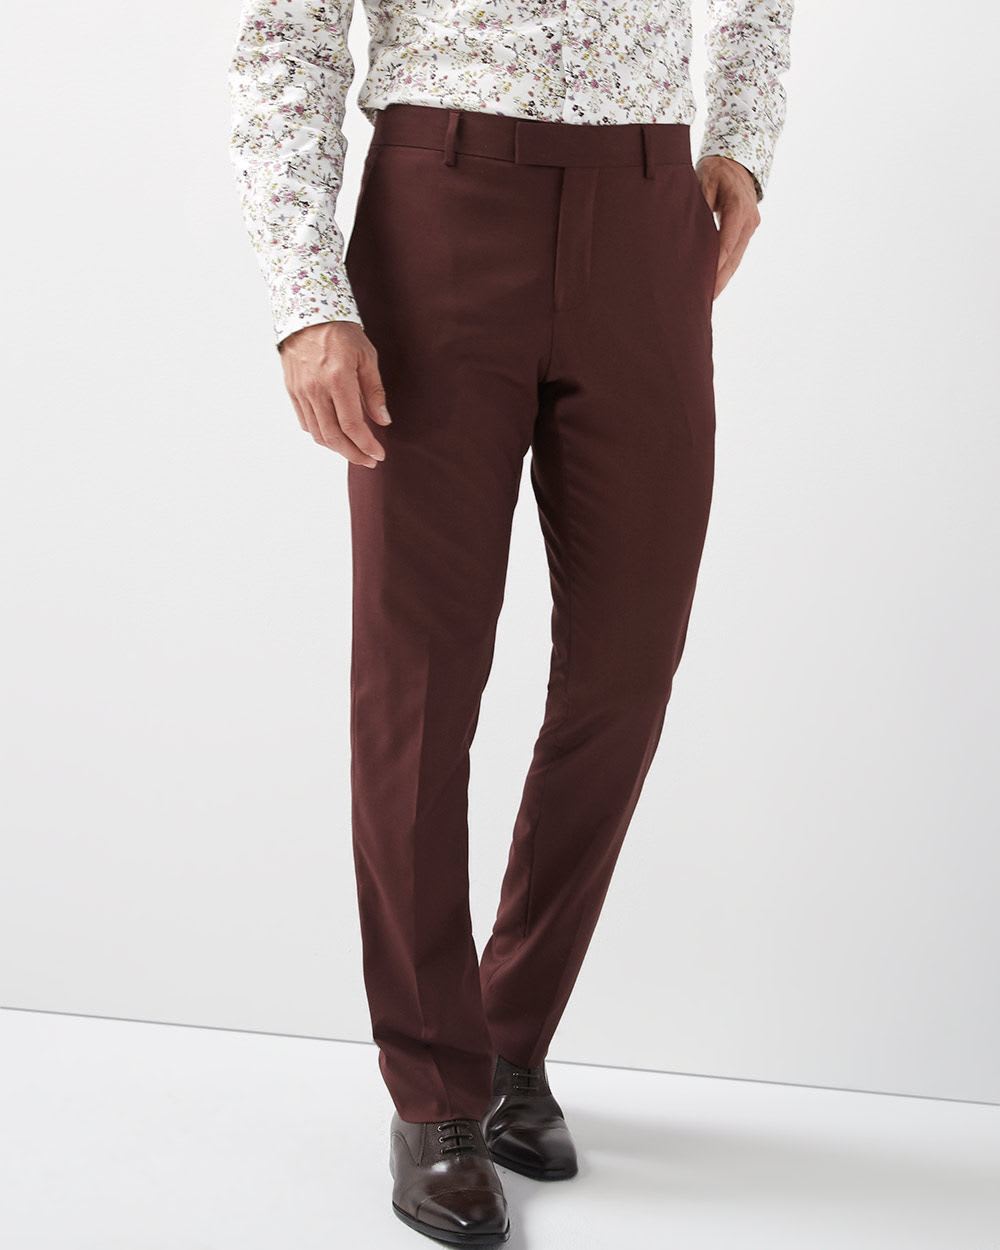 Slim Fit Deep Red Pant - Tall | RW&CO.